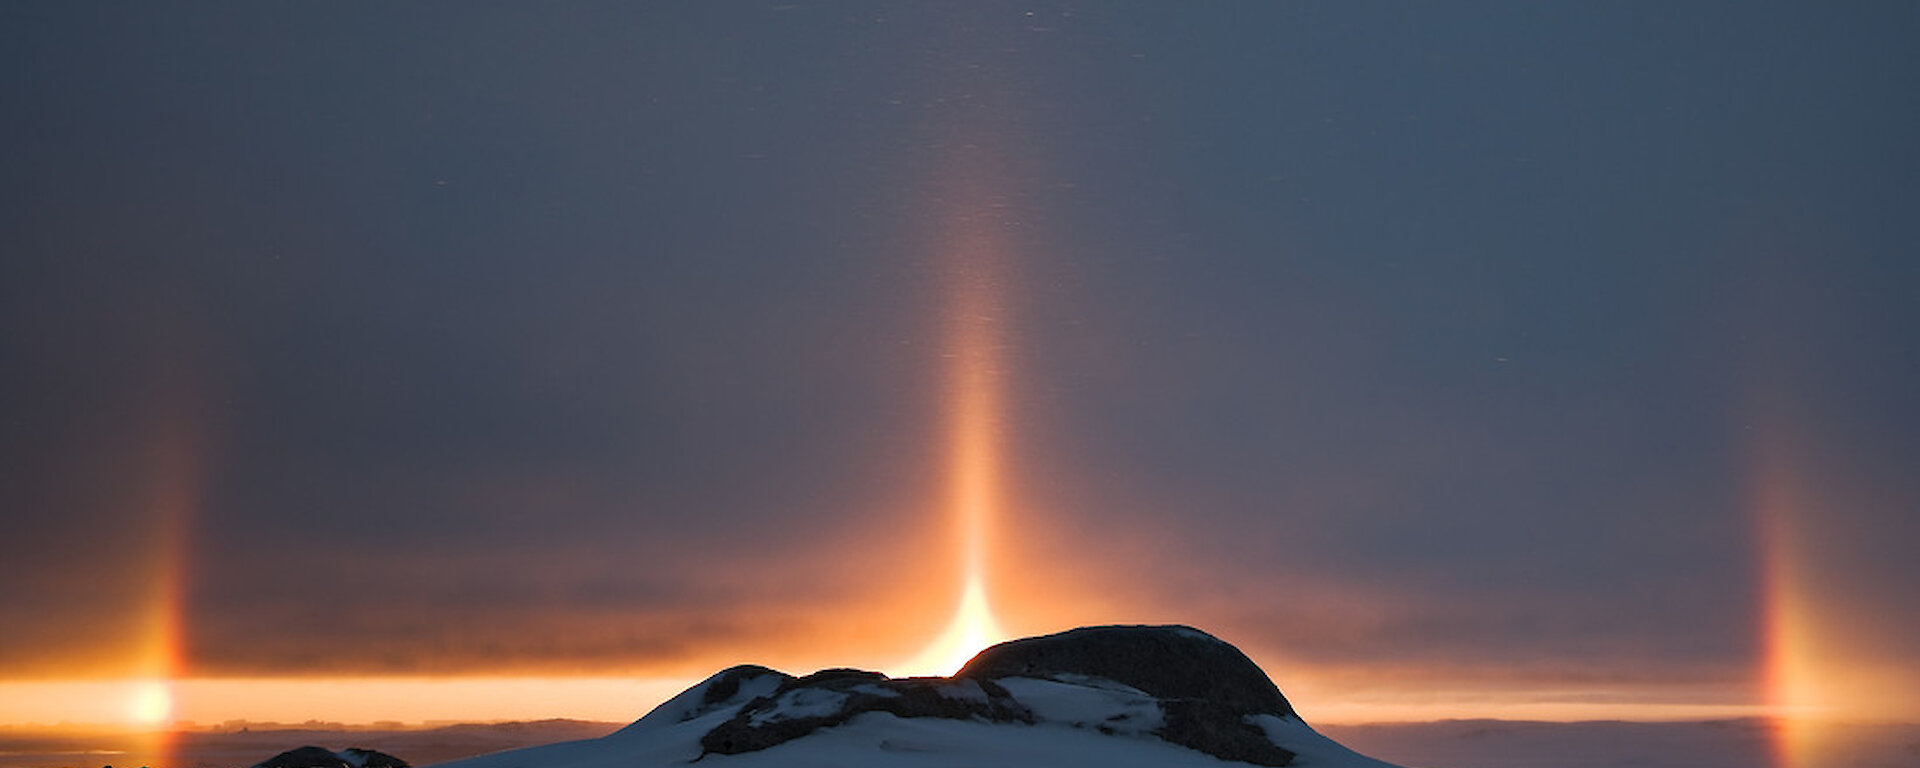 Parhelion or sun dogs on the Antarctic horizon. Sun dogs are created by light interacting with ice crystals in the atmosphere. Sun dogs typically appear as two subtly coloured patches of light to the left and right of the Sun, approximately 22° distant and at the same elevation above the horizon as the Sun.